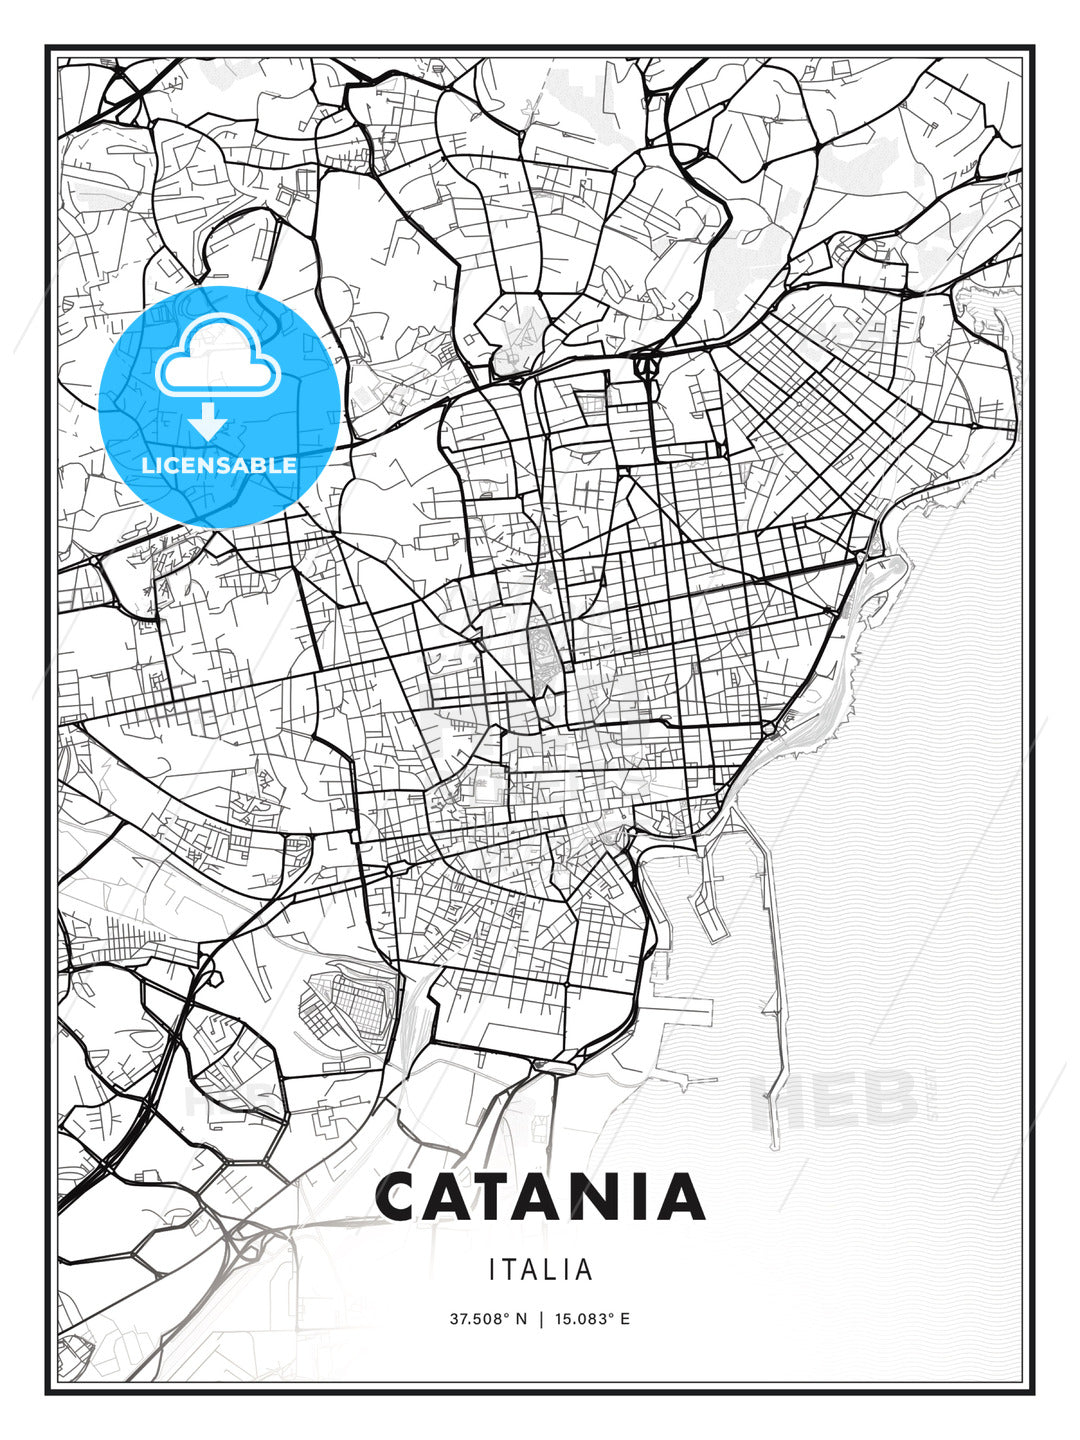 Catania, Italy, Modern Print Template in Various Formats - HEBSTREITS Sketches